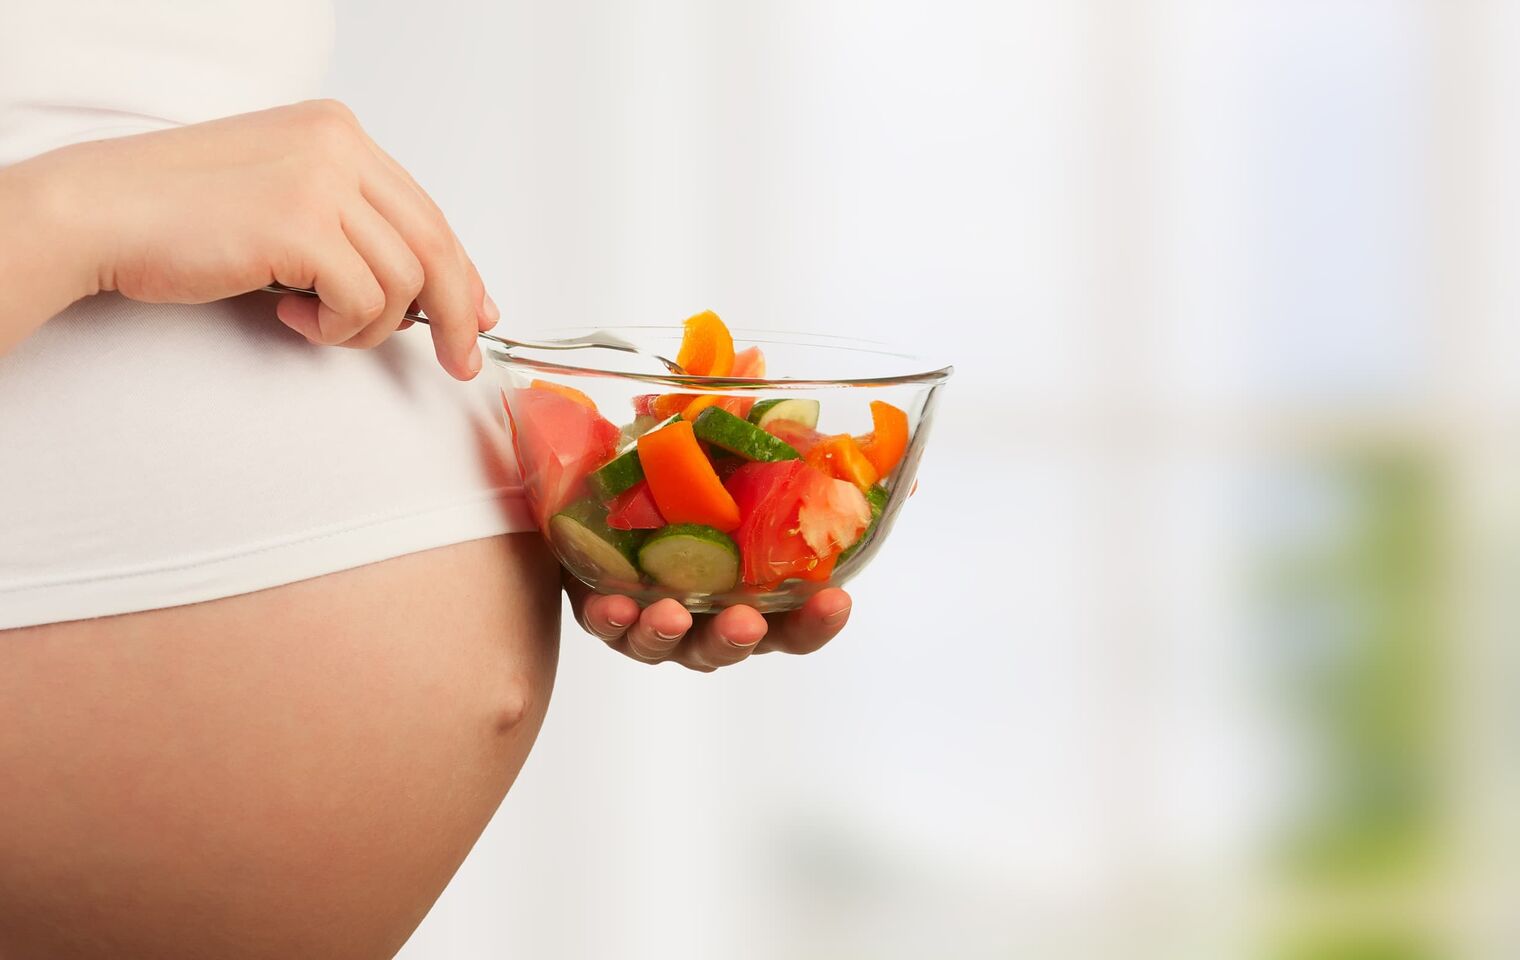 Healthy Nutrition And Pregnancy cropped